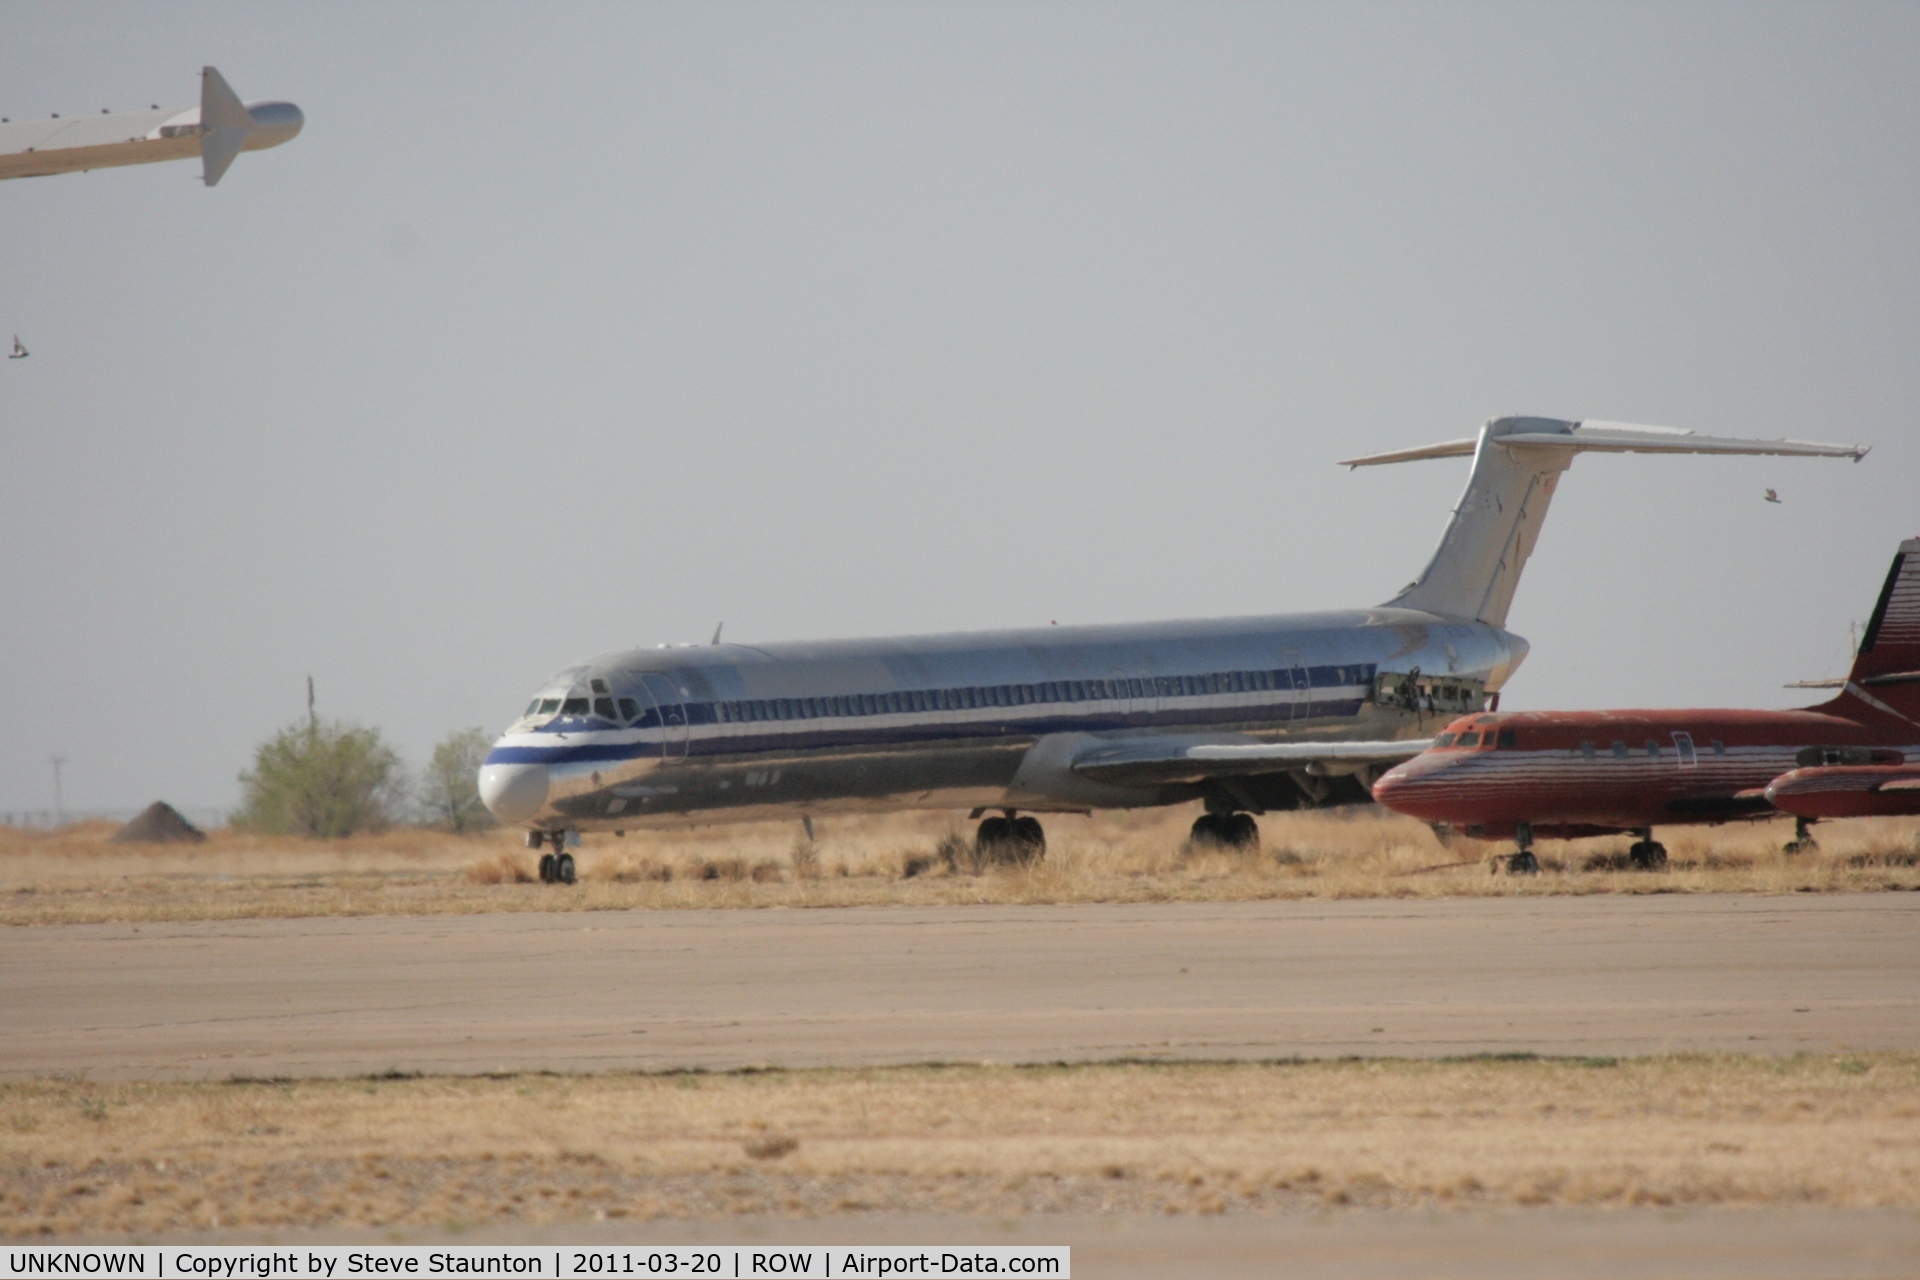 UNKNOWN, McDonnell Douglas MD-80 (DC-9) C/N Unknown, Taken at Roswell International Air Centre Storage Facility, New Mexico in March 2011 whilst on an Aeroprint Aviation tour - an unknown AA DC-9